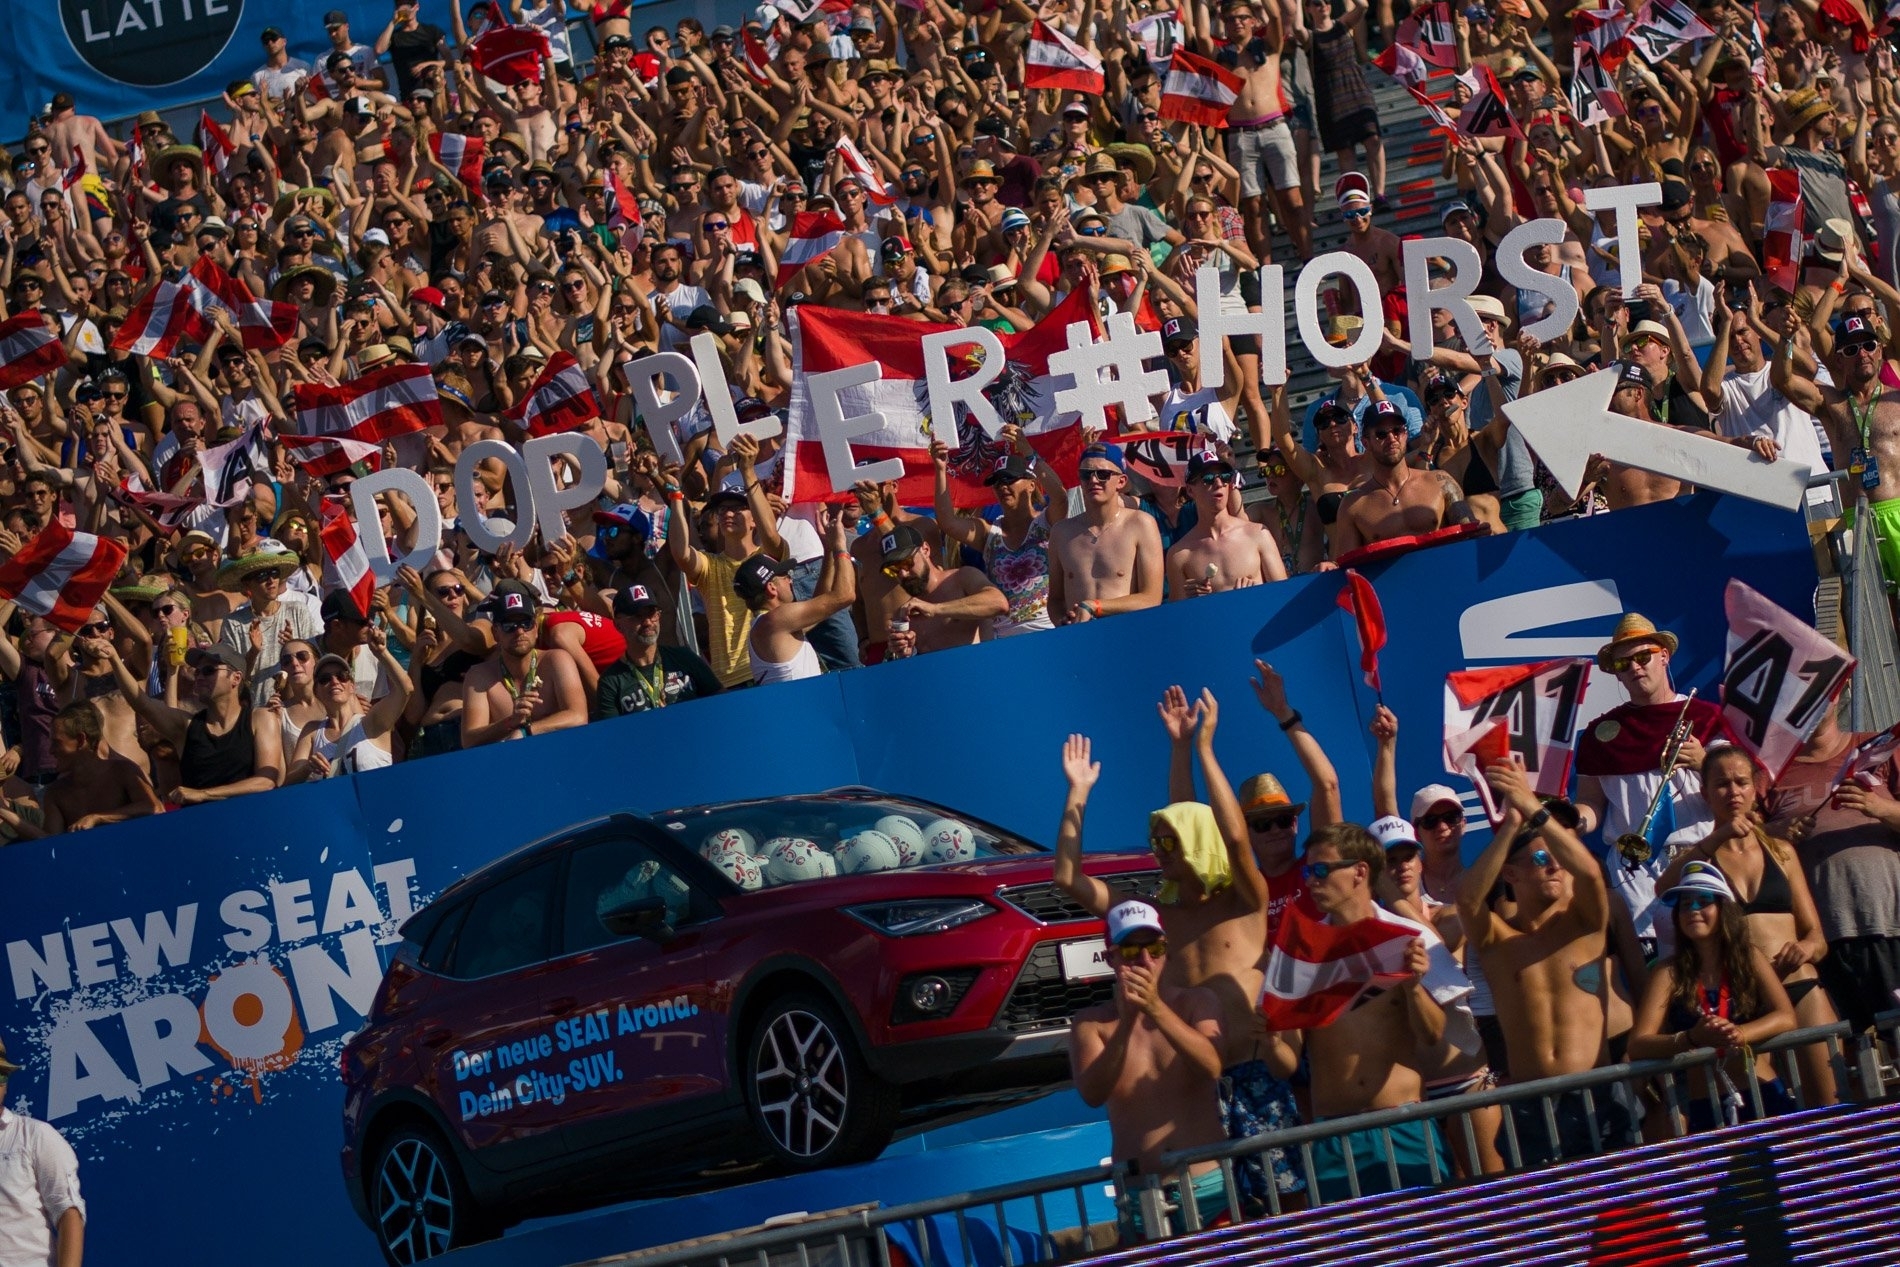 The Red Bull Beach Arena was completely packed to witness two Austrian victories